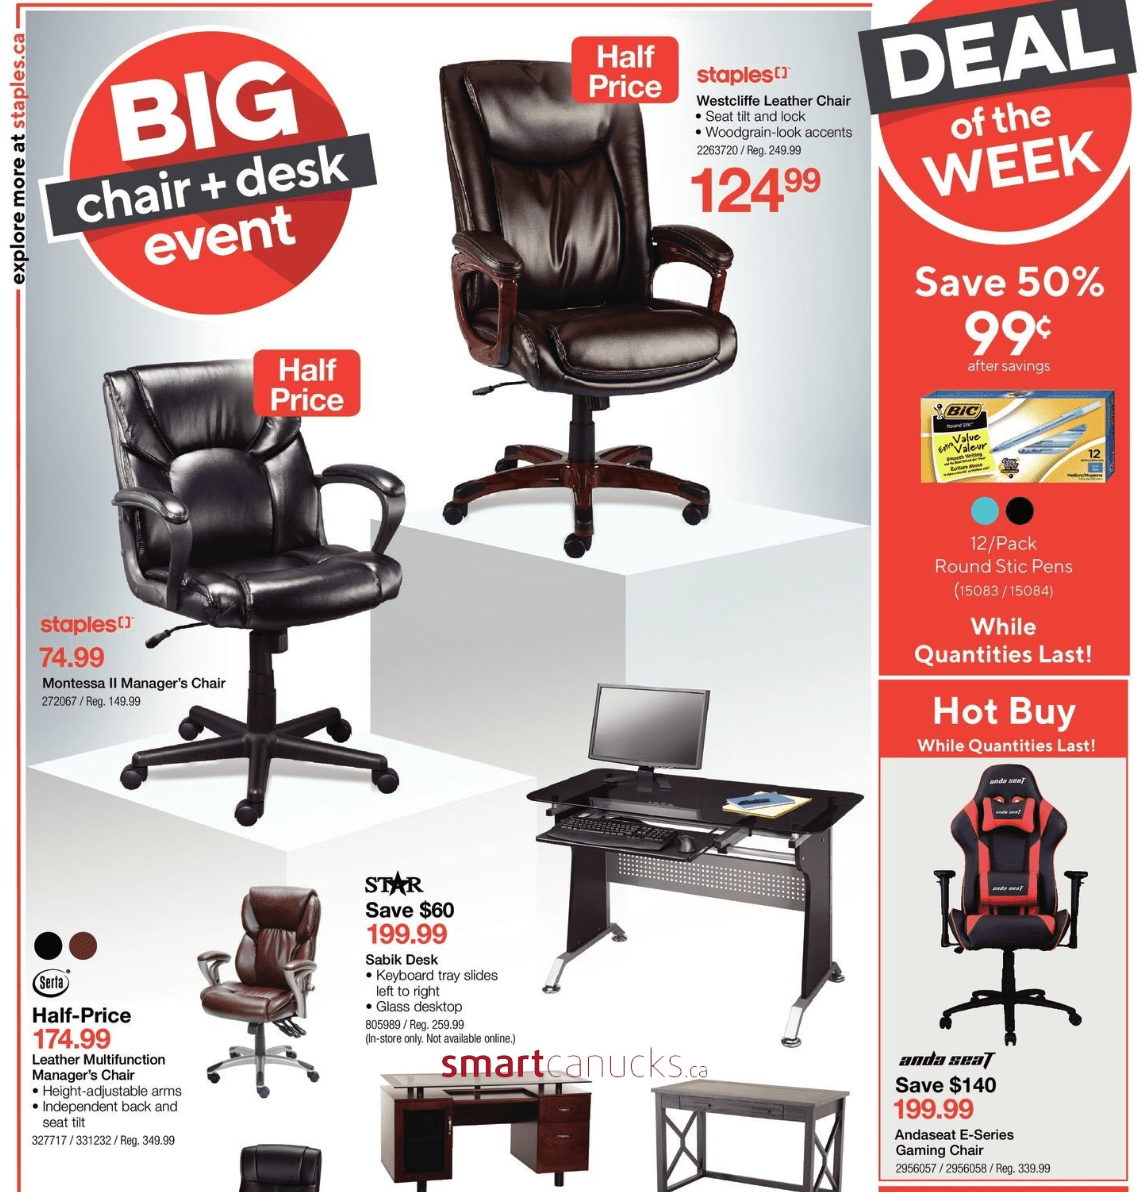 Staples Canada Big Chair Desk Event Save Up To 50 On Selected